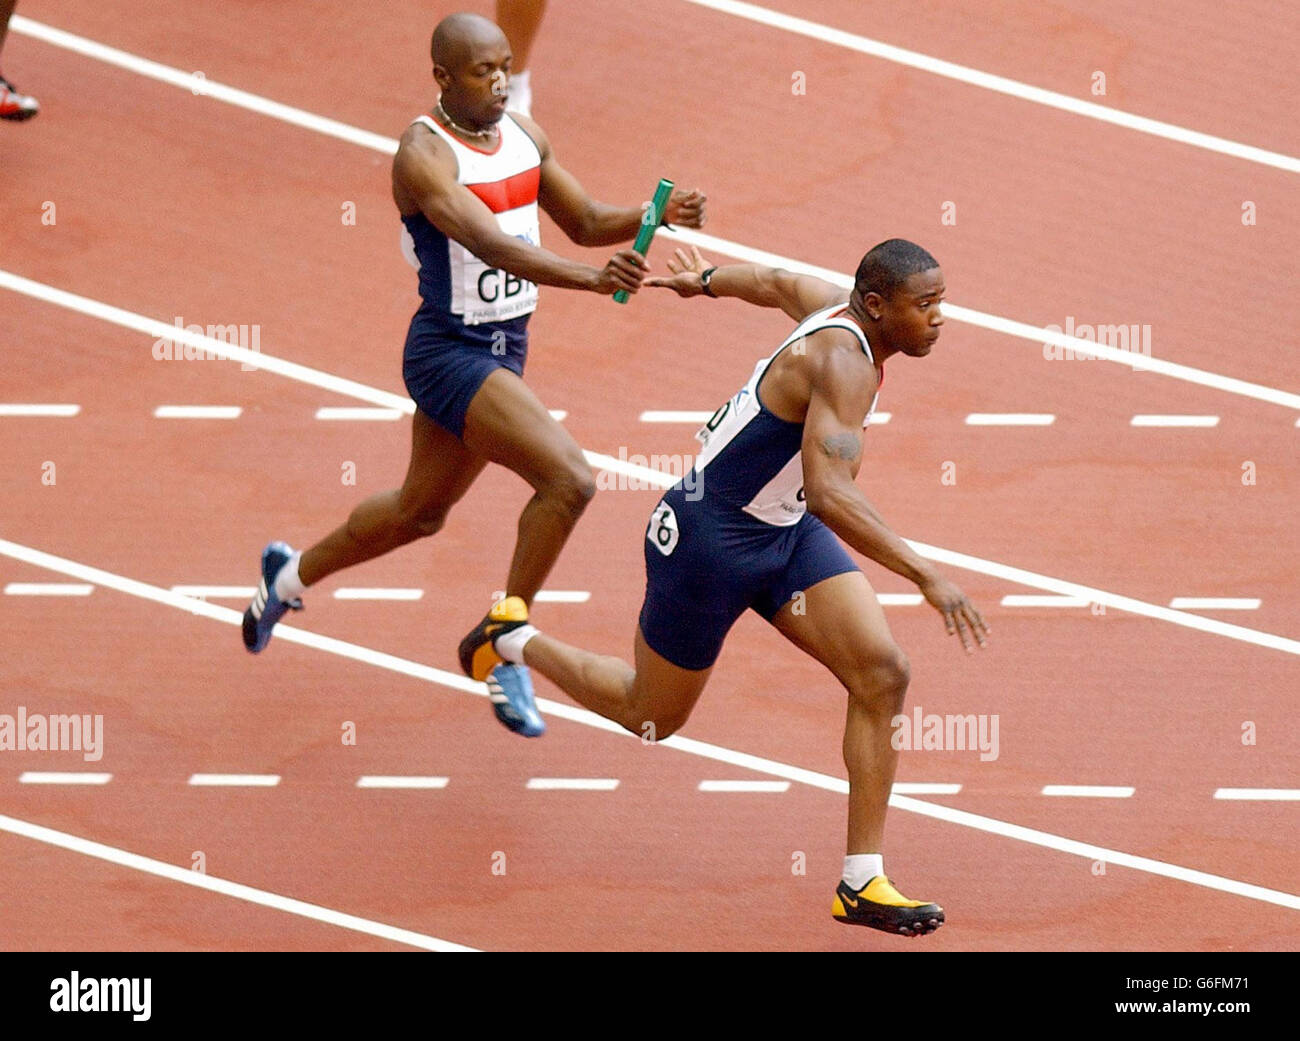 Mark Lewis Francis (right) takes the baton from Marlon Devonish to give the Great Britain 4x100 relay Team an easy first round victory in their event at the Athletics World Championships in Paris. Stock Photo